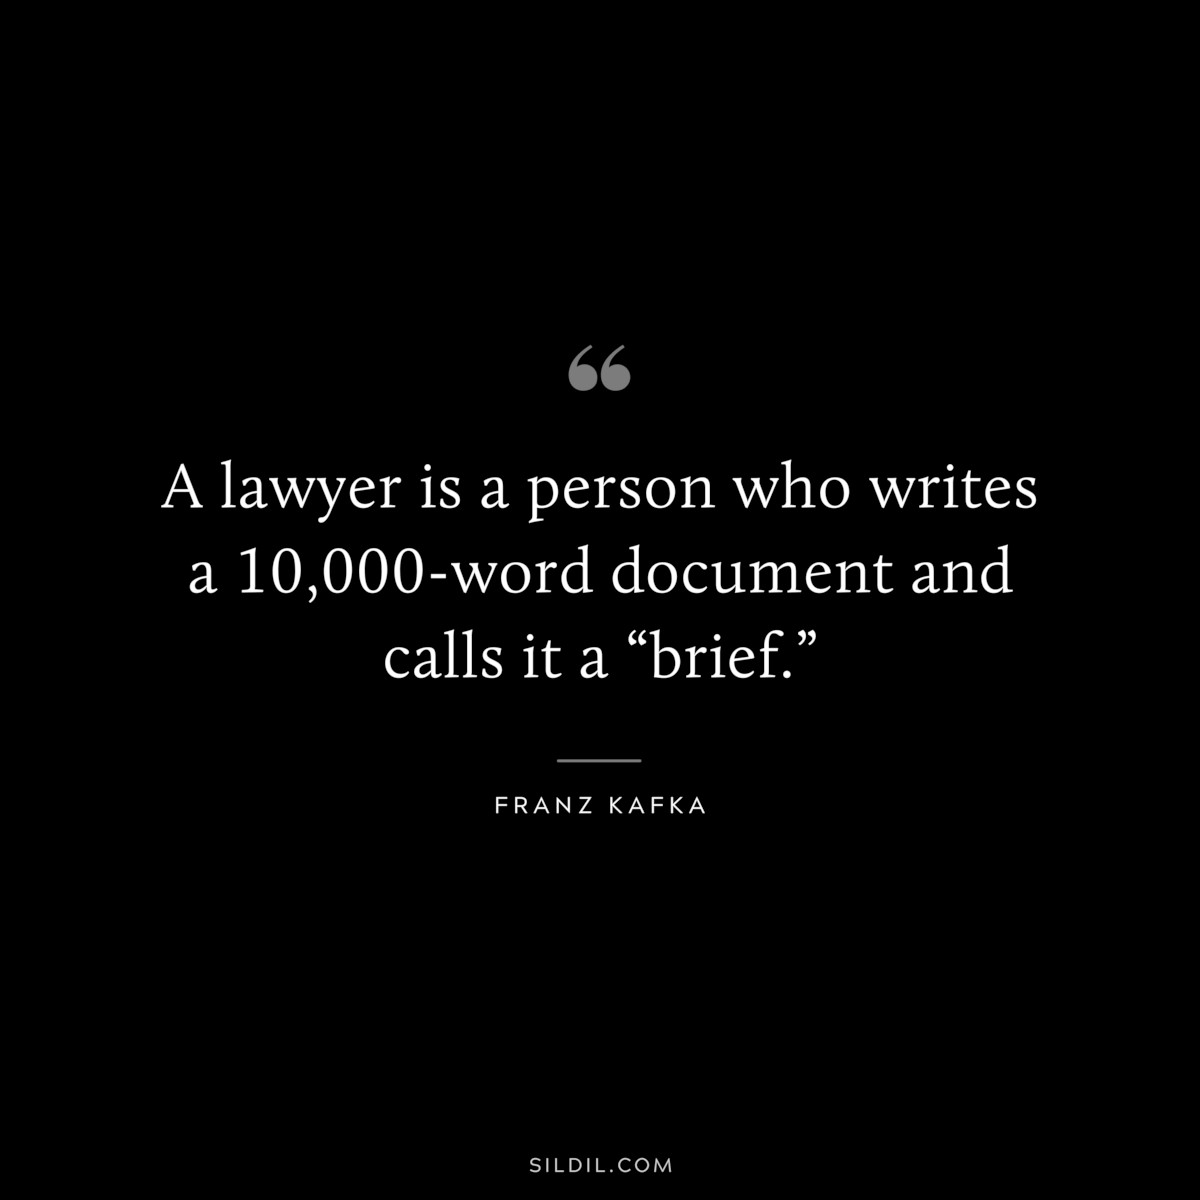 A lawyer is a person who writes a 10,000-word document and calls it a “brief.” ― Franz Kafka